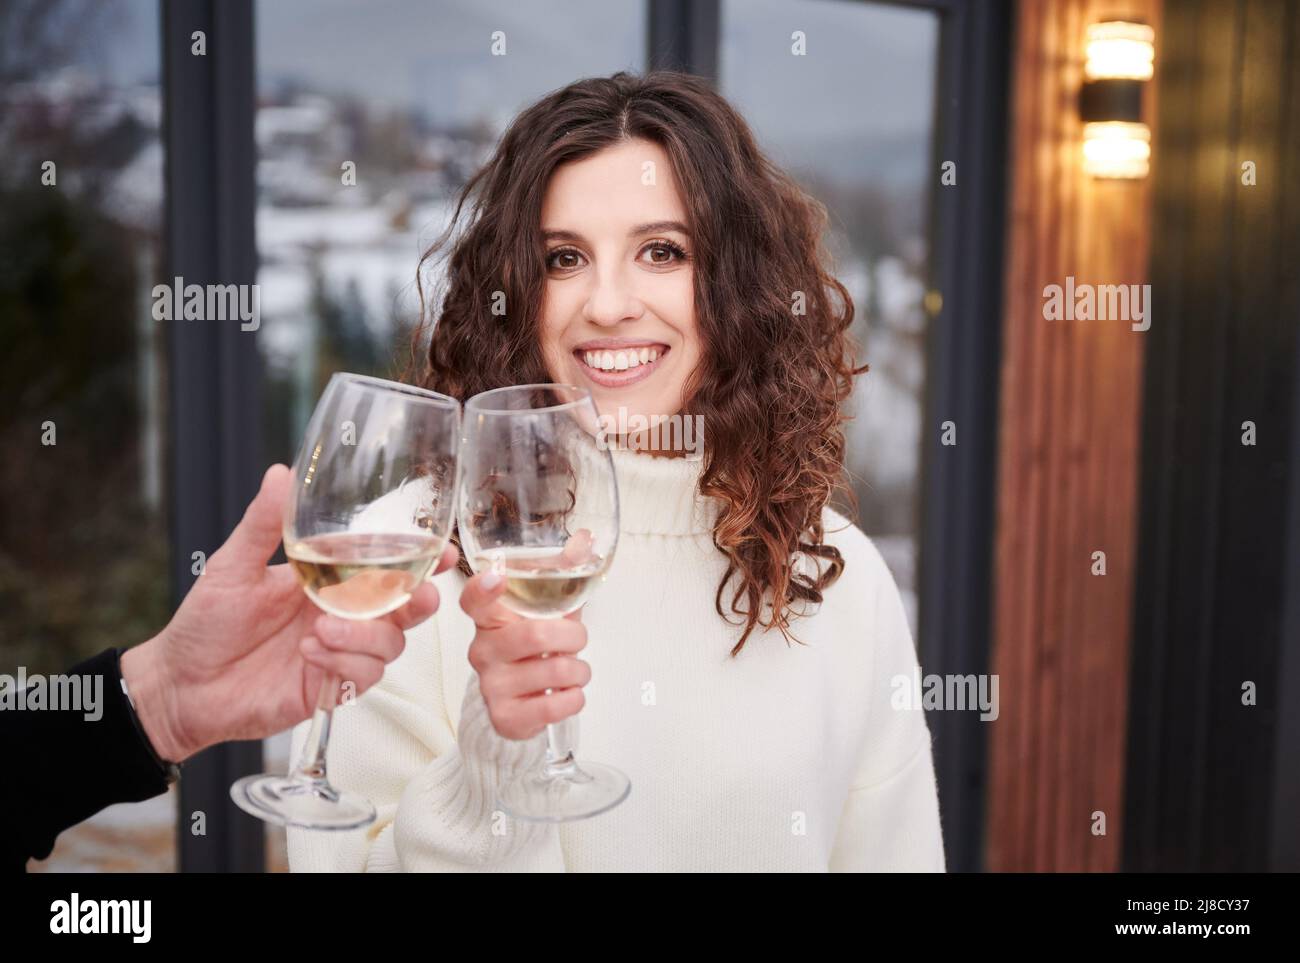 Happy couple toasting with wine enjoying alcoholic drink and celebrating together outdoors. Cheerful woman looking to the camera and smiling while clinking wine glasses. Celebration concept. Stock Photo